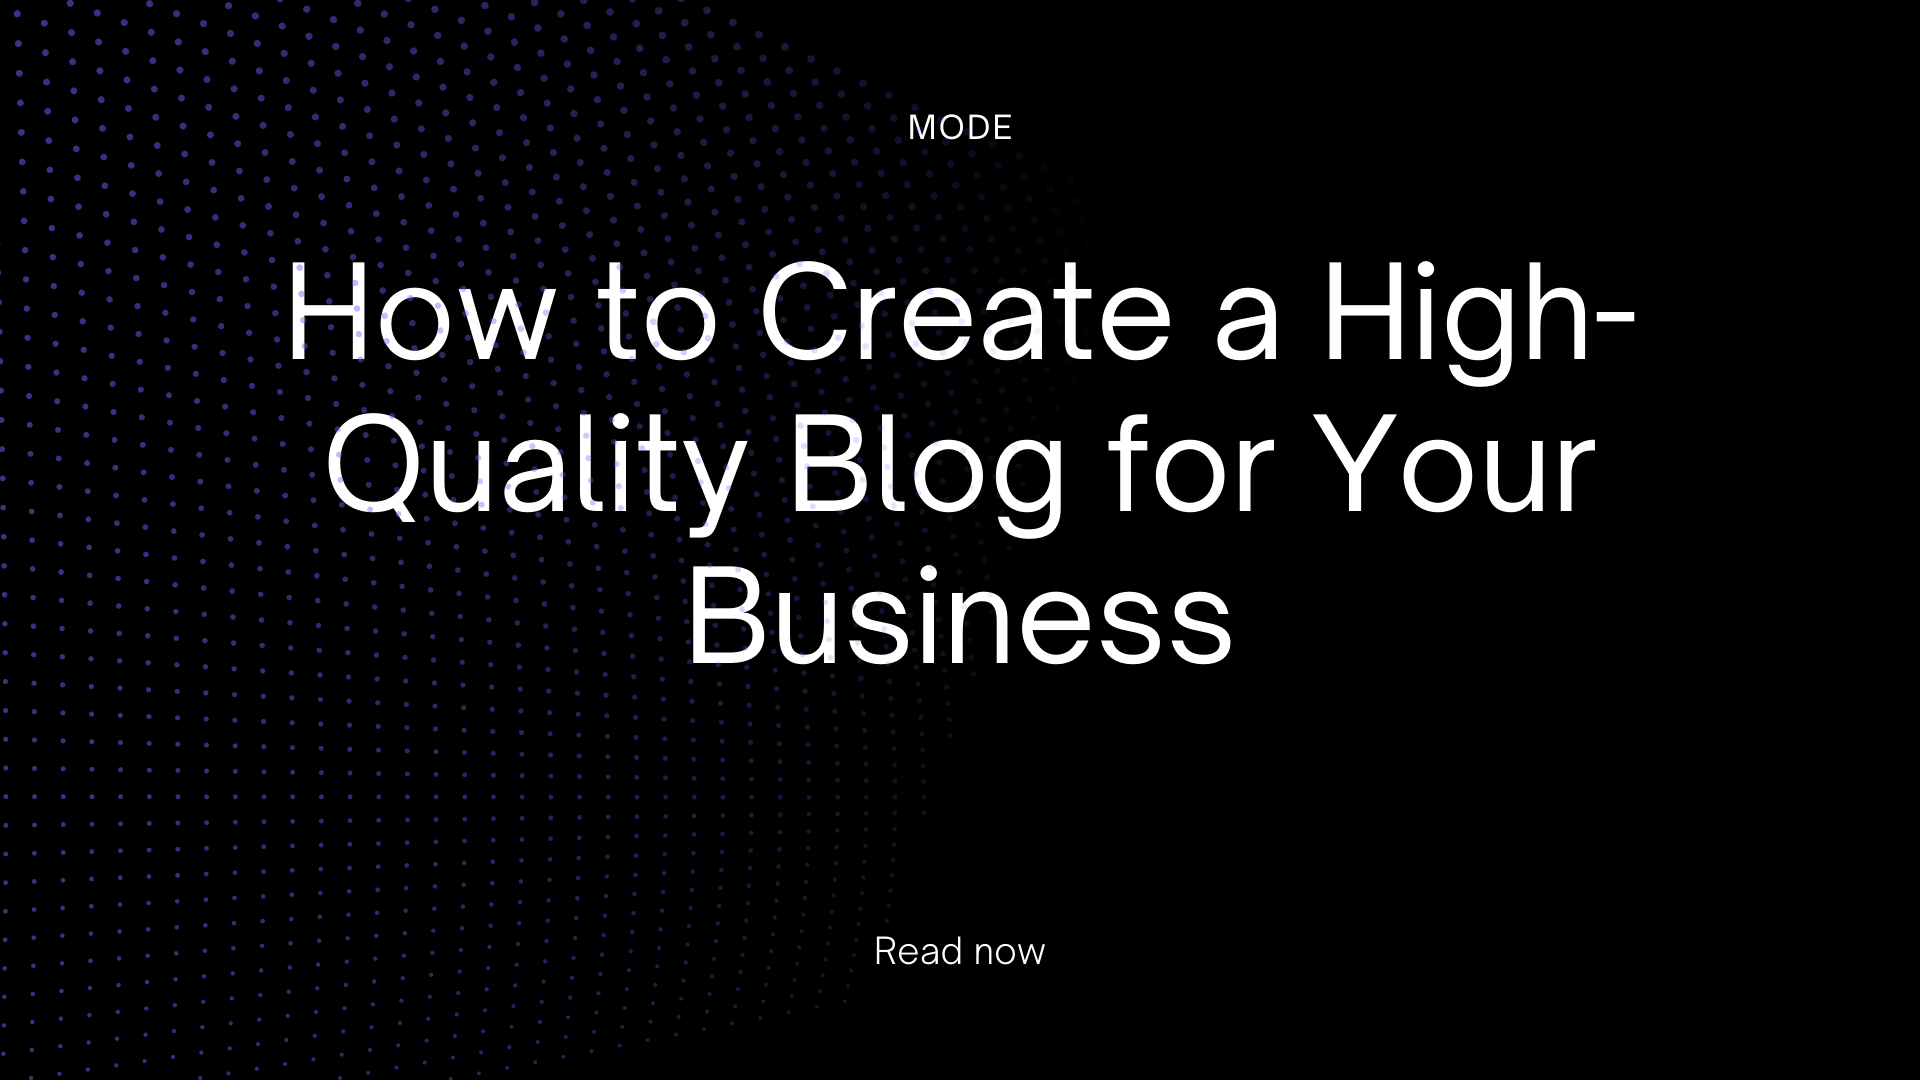 How to Create a High-Quality Blog for Your Business